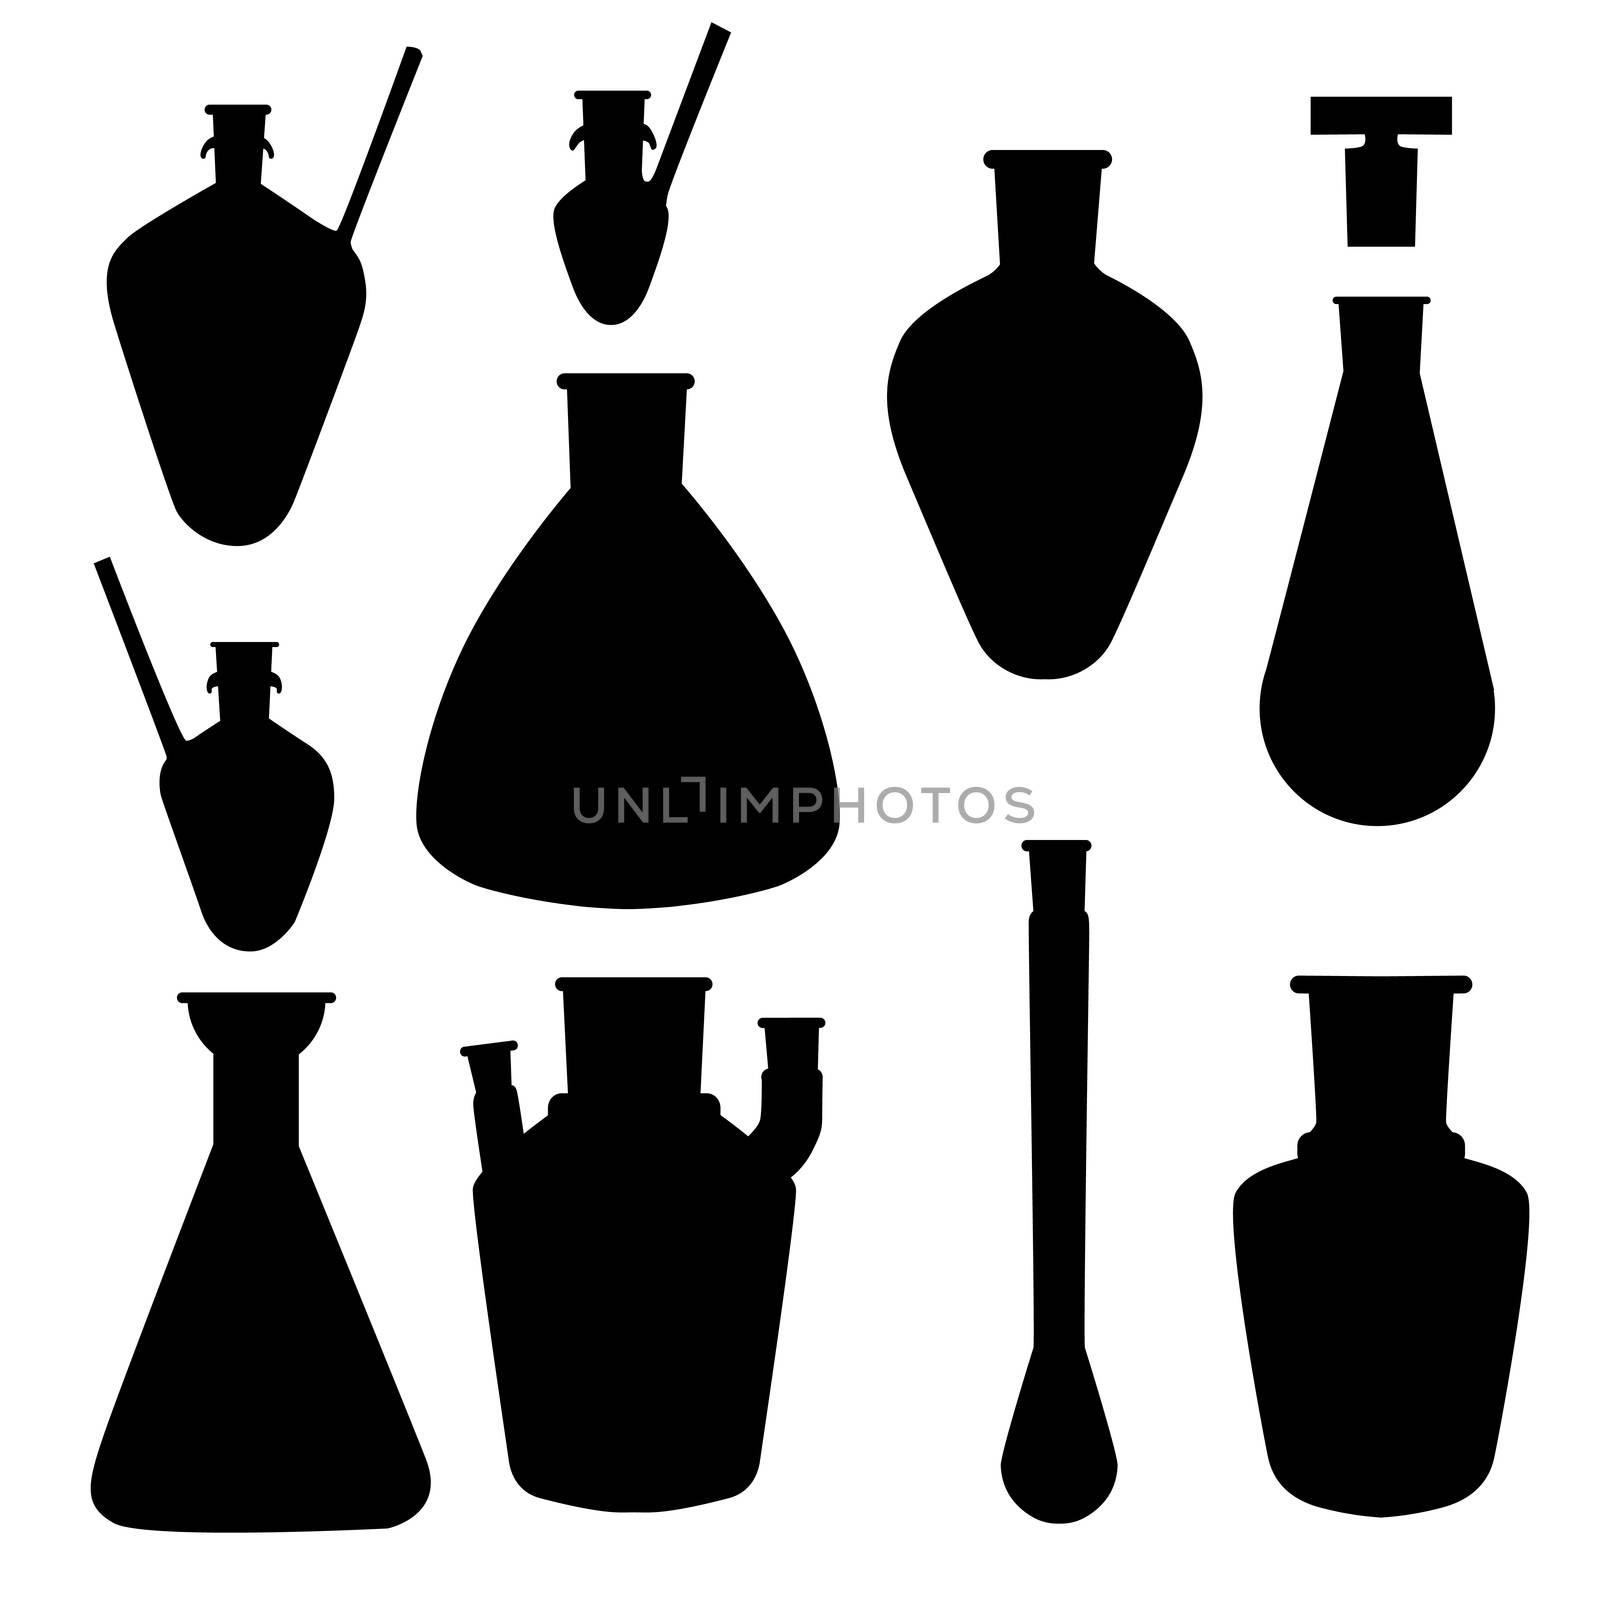 Chemistry lab glasses silhouettes, objects collection isolated on white